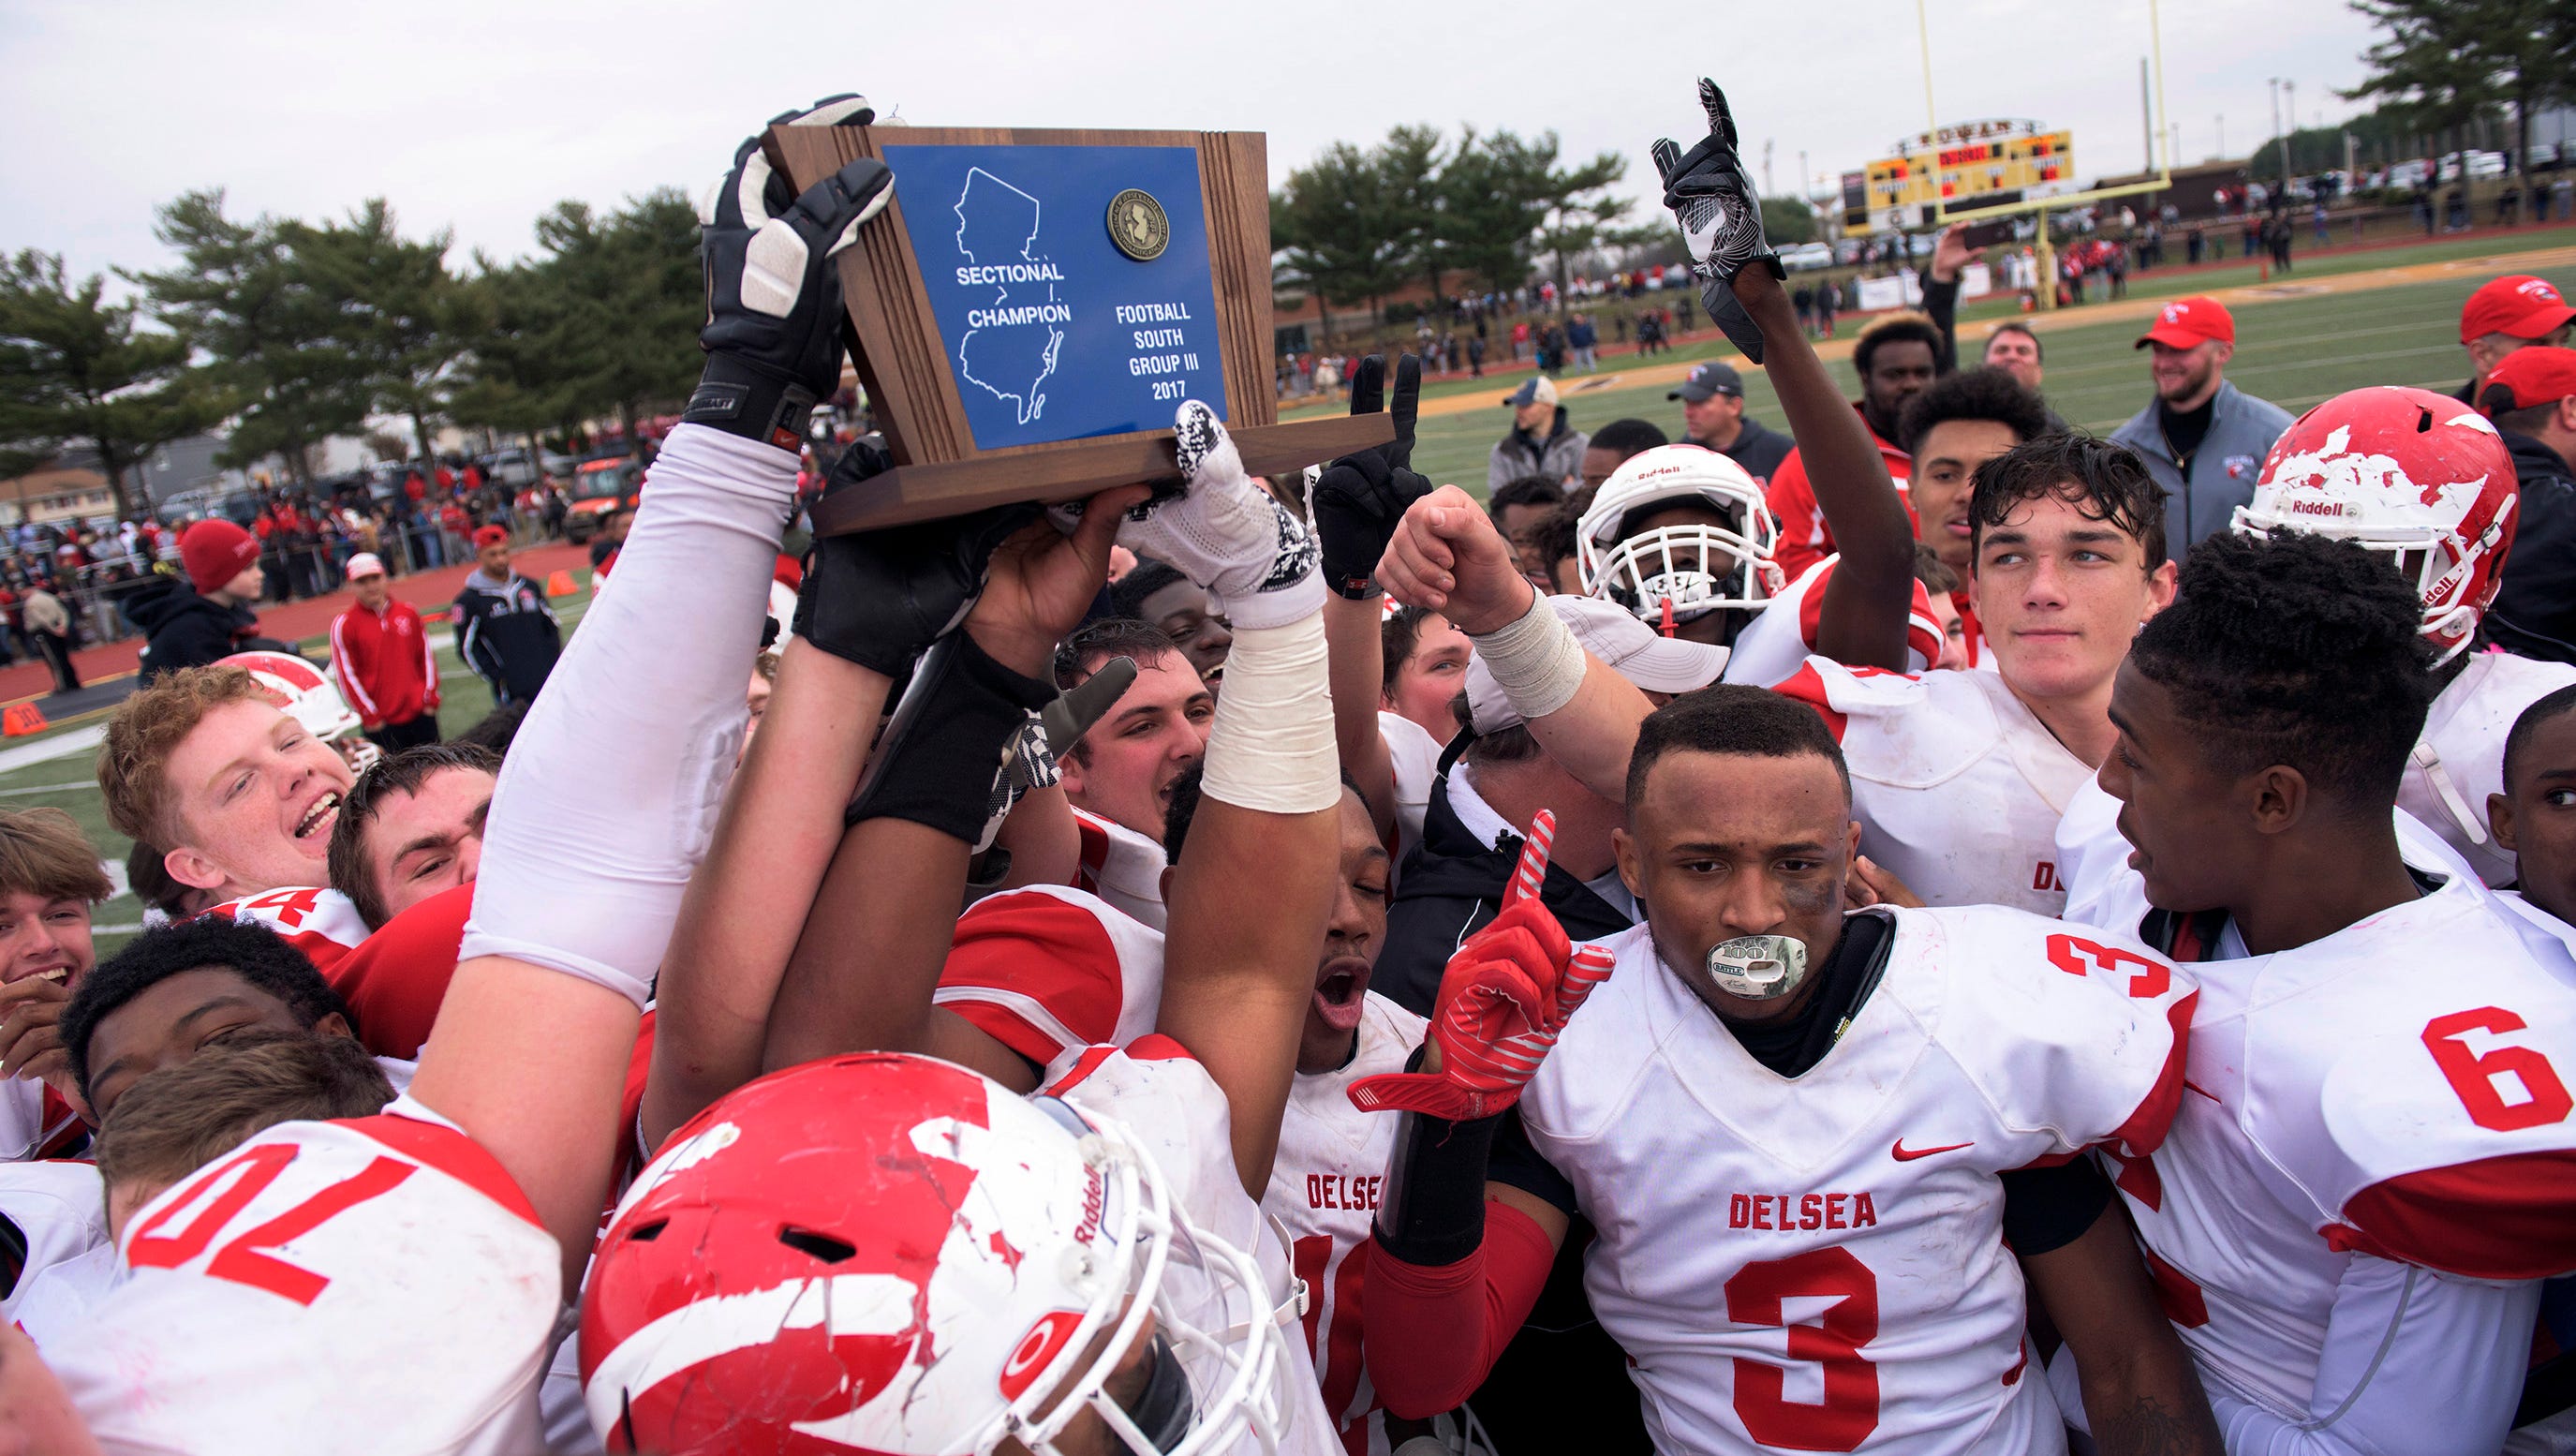 Delsea earns Team of the Year honor in football